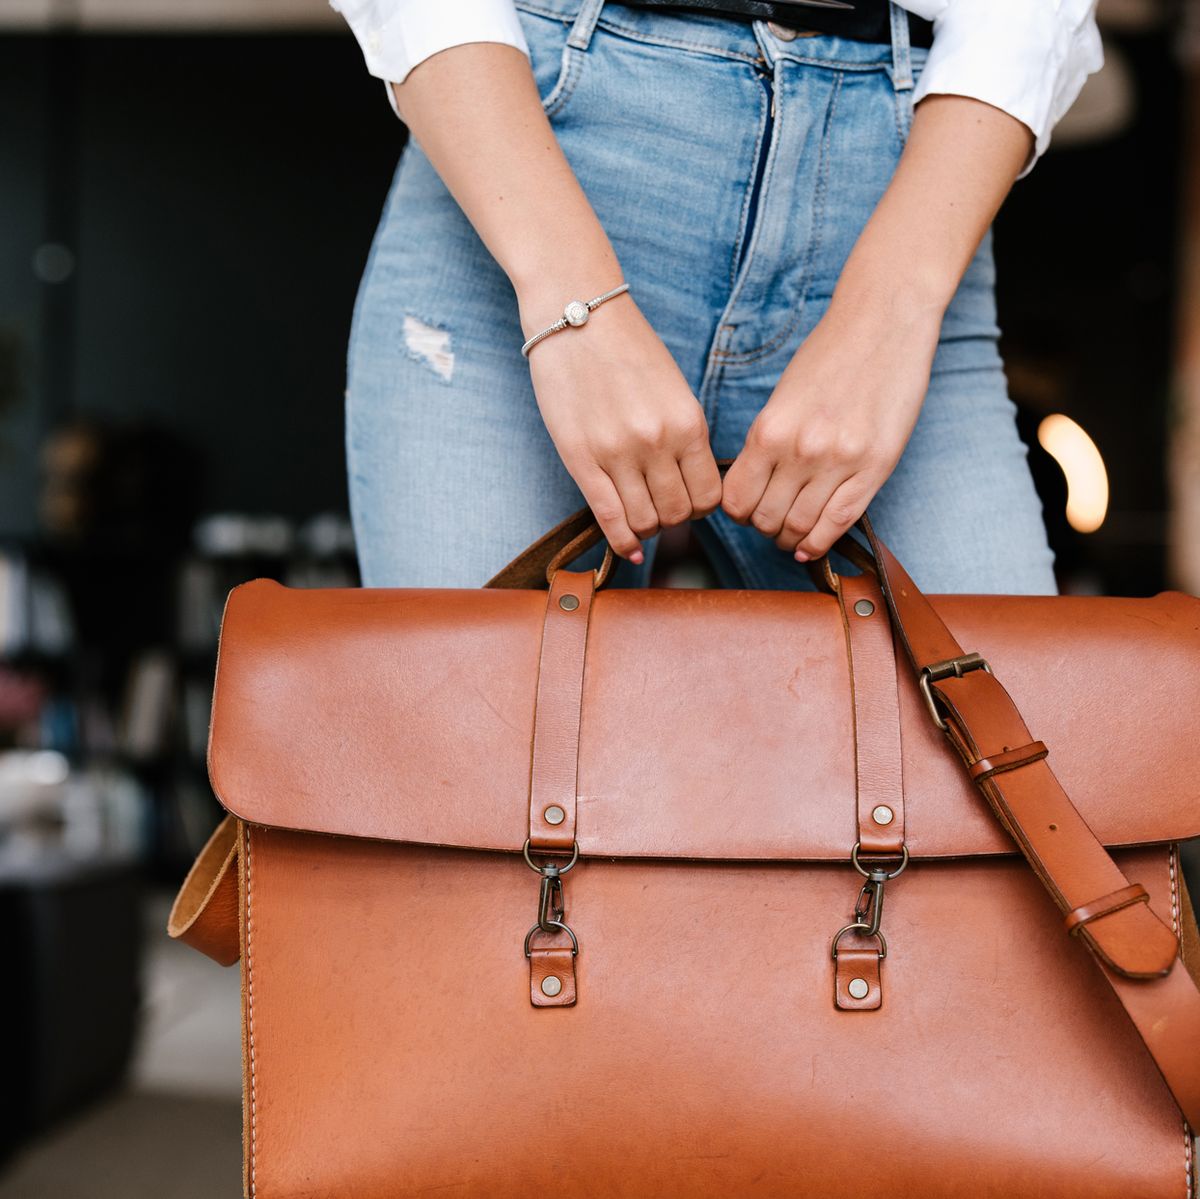 16 Cute Laptop Bags That Make Traveling Chic and Easy - Brit + Co